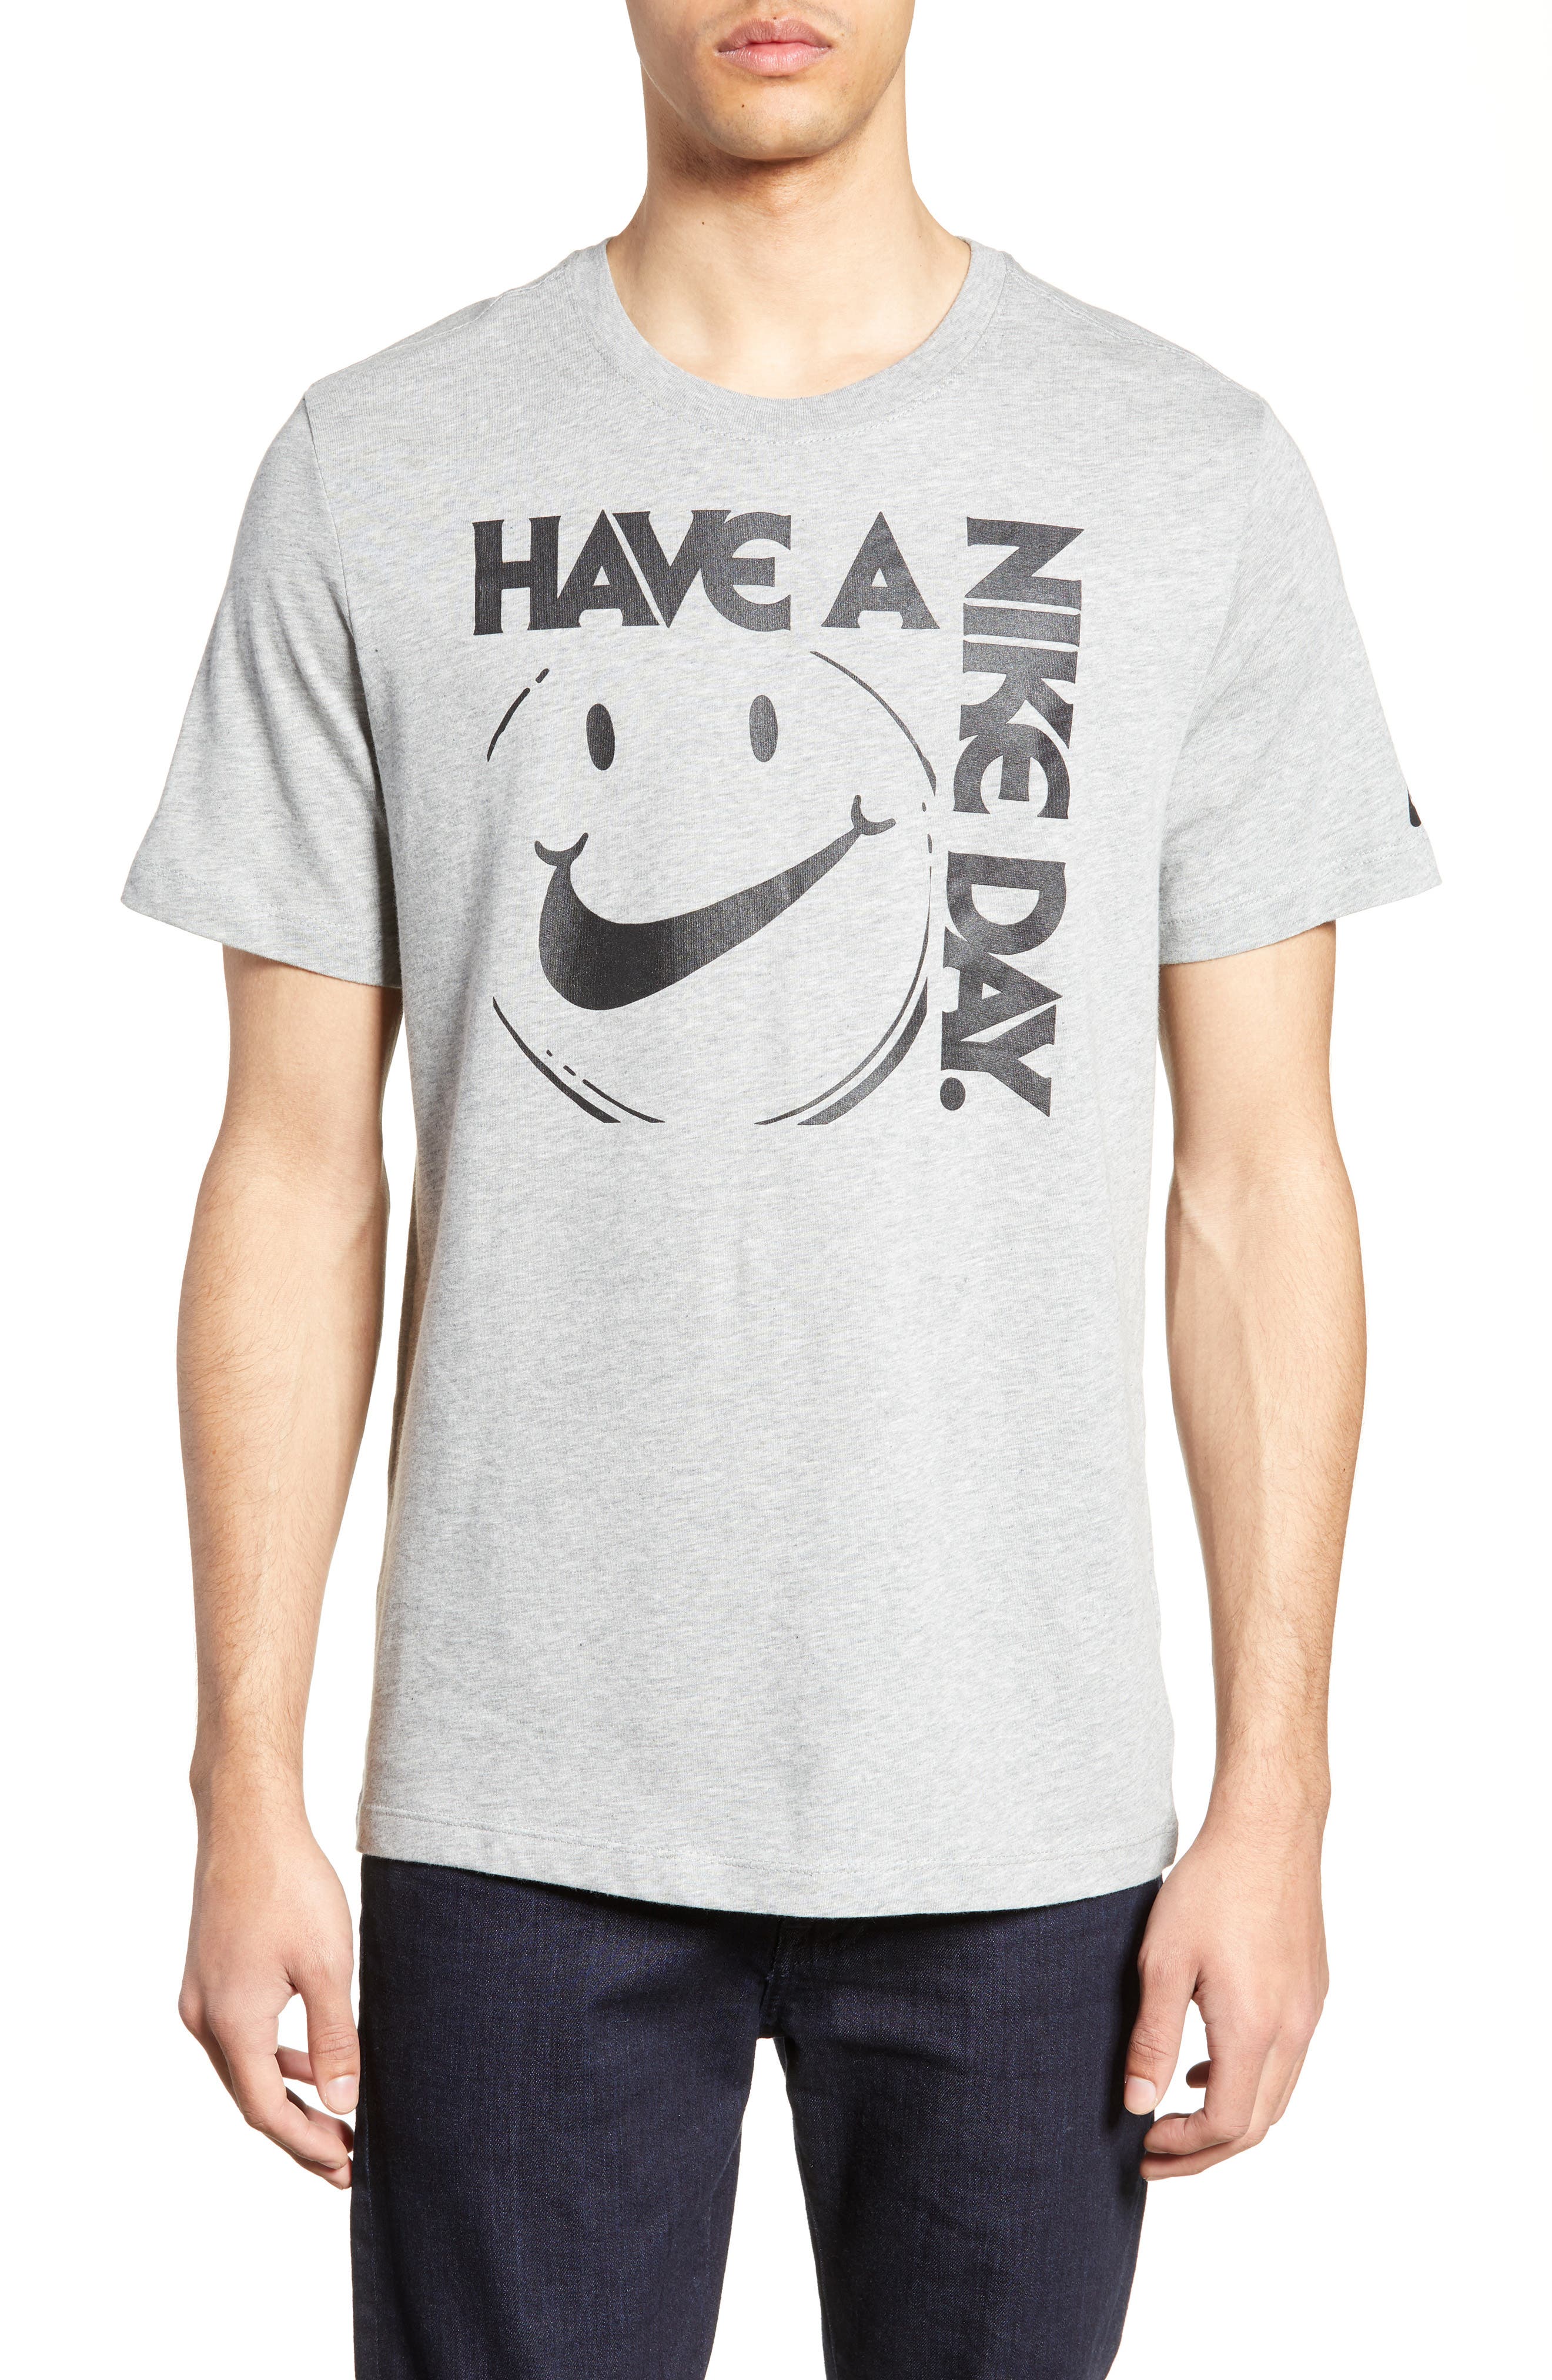 t shirt have a nike day